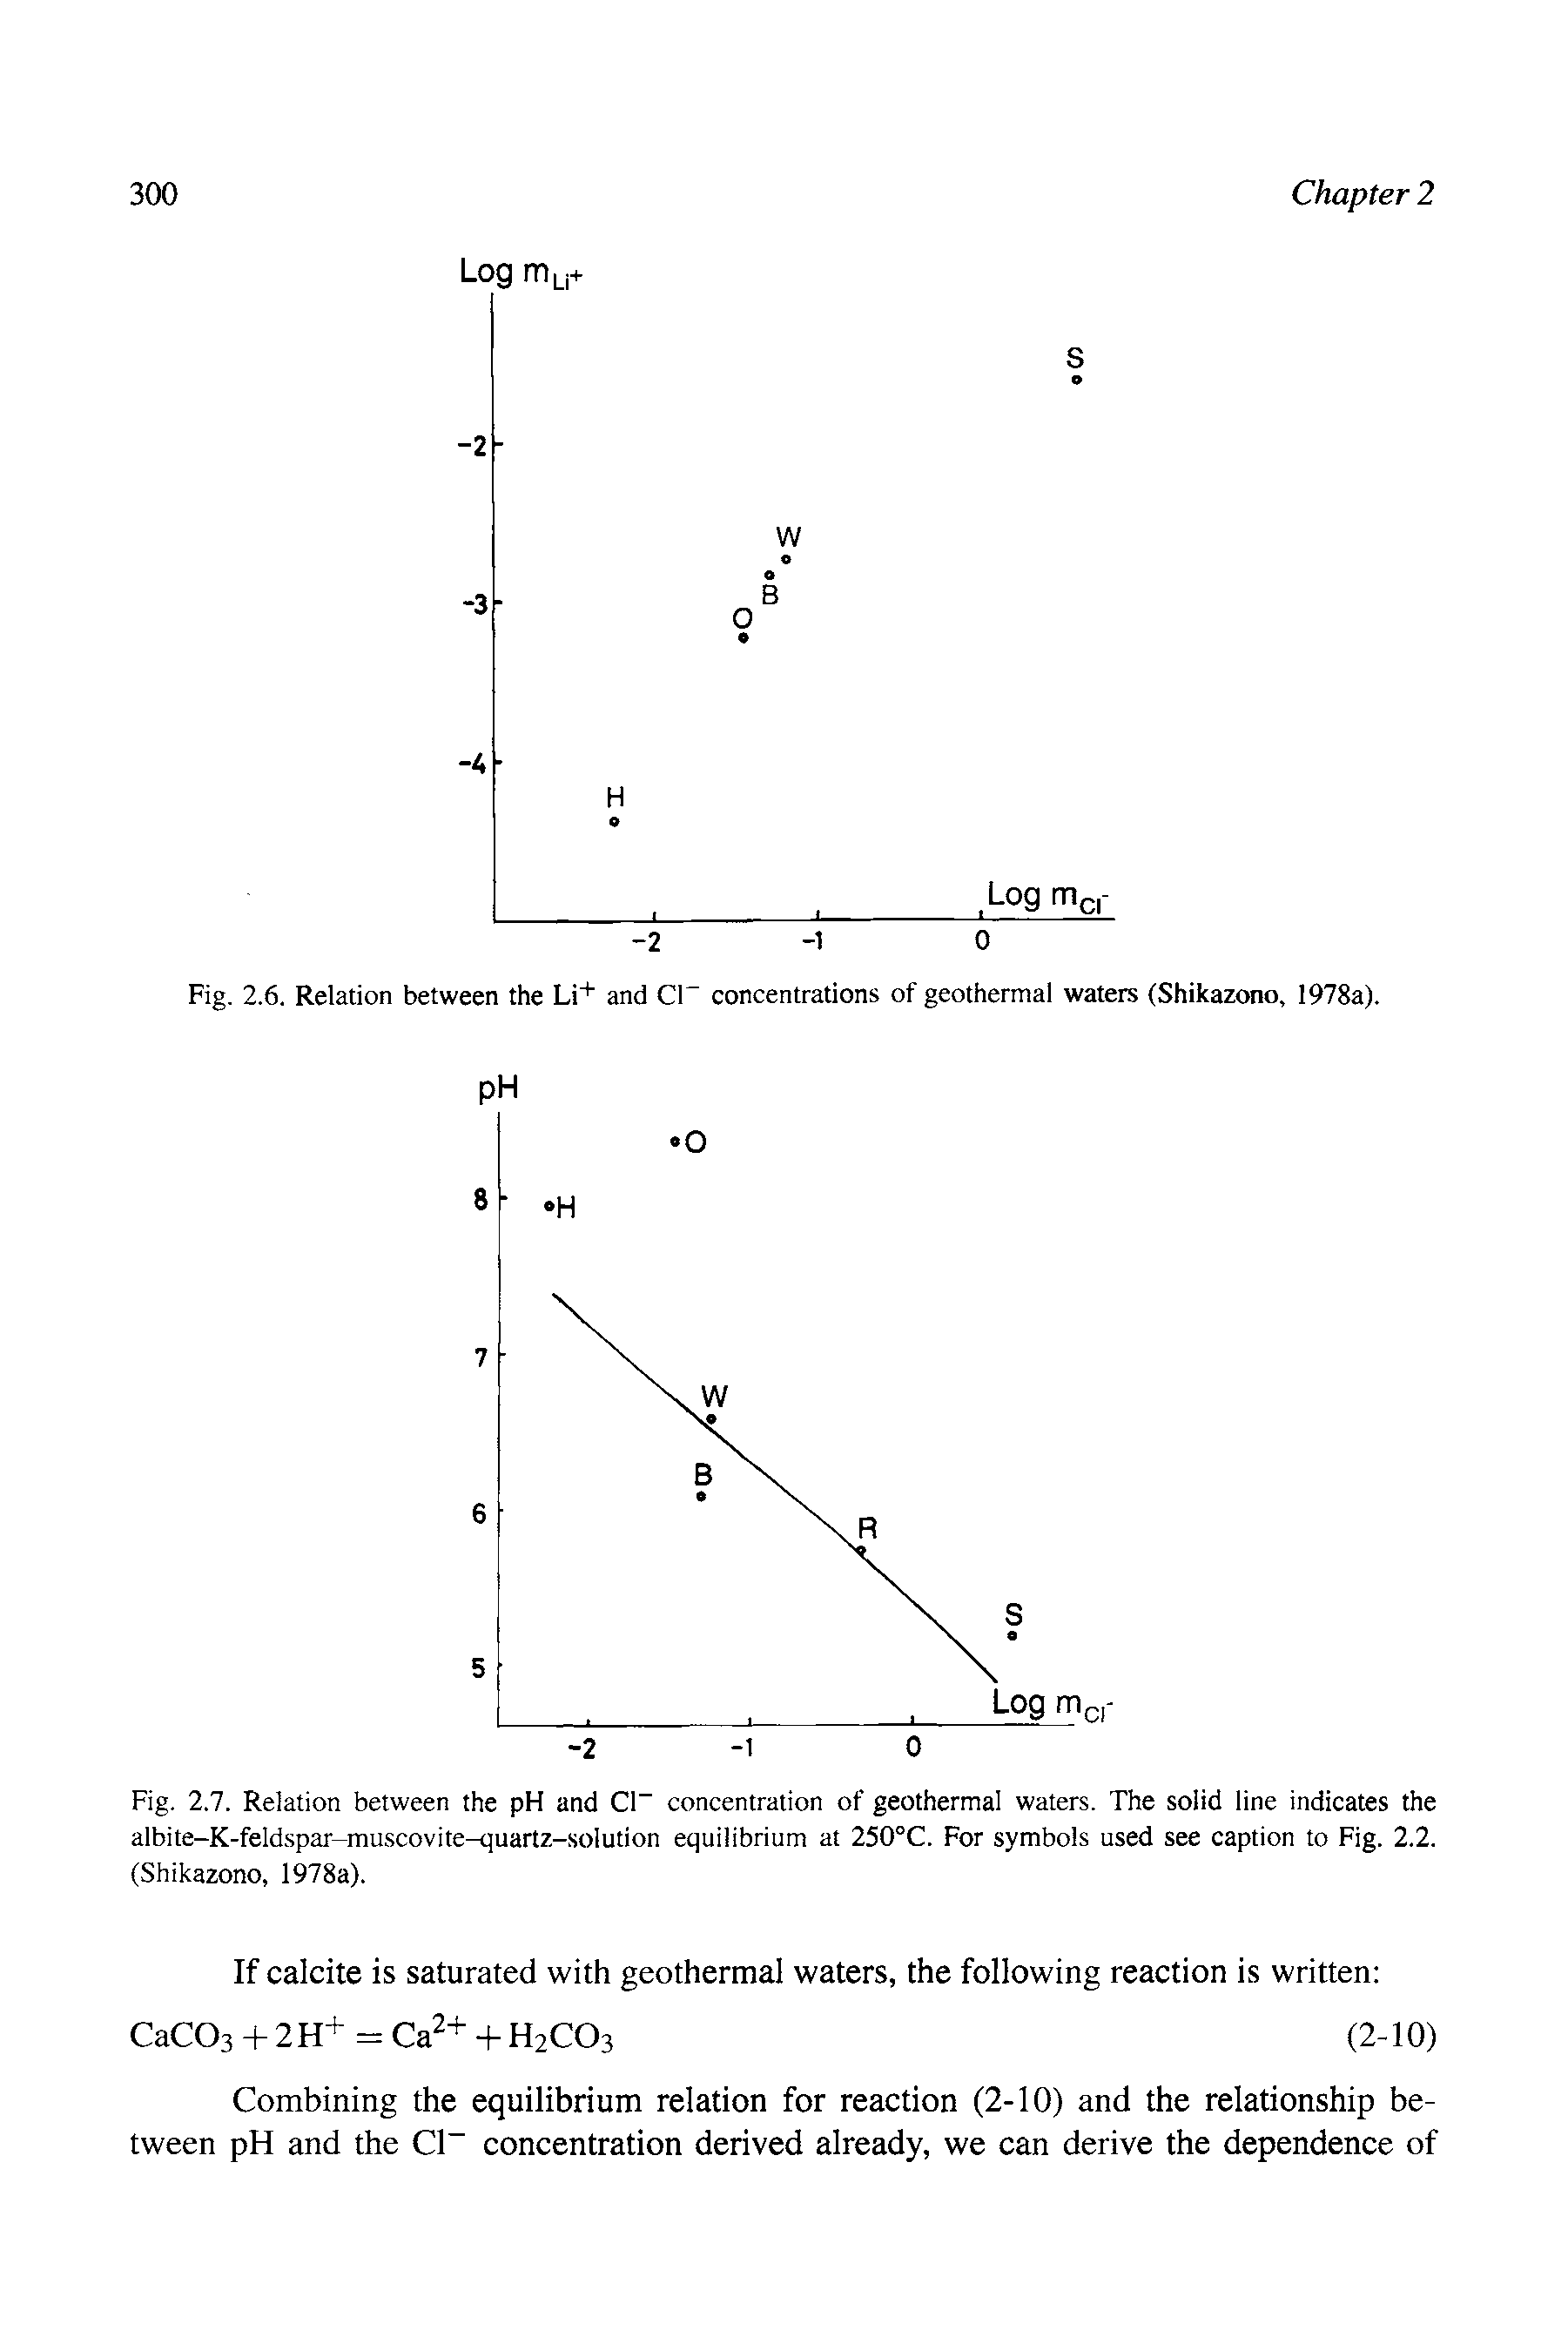 Fig. 2.7. Relation between the pH and CP concentration of geothermal waters. The solid line indicates the albite-K-feldspar-muscovite-quartz-solution equilibrium at 250°C. For symbols used see caption to Fig. 2.2. (Shikazono, 1978a).